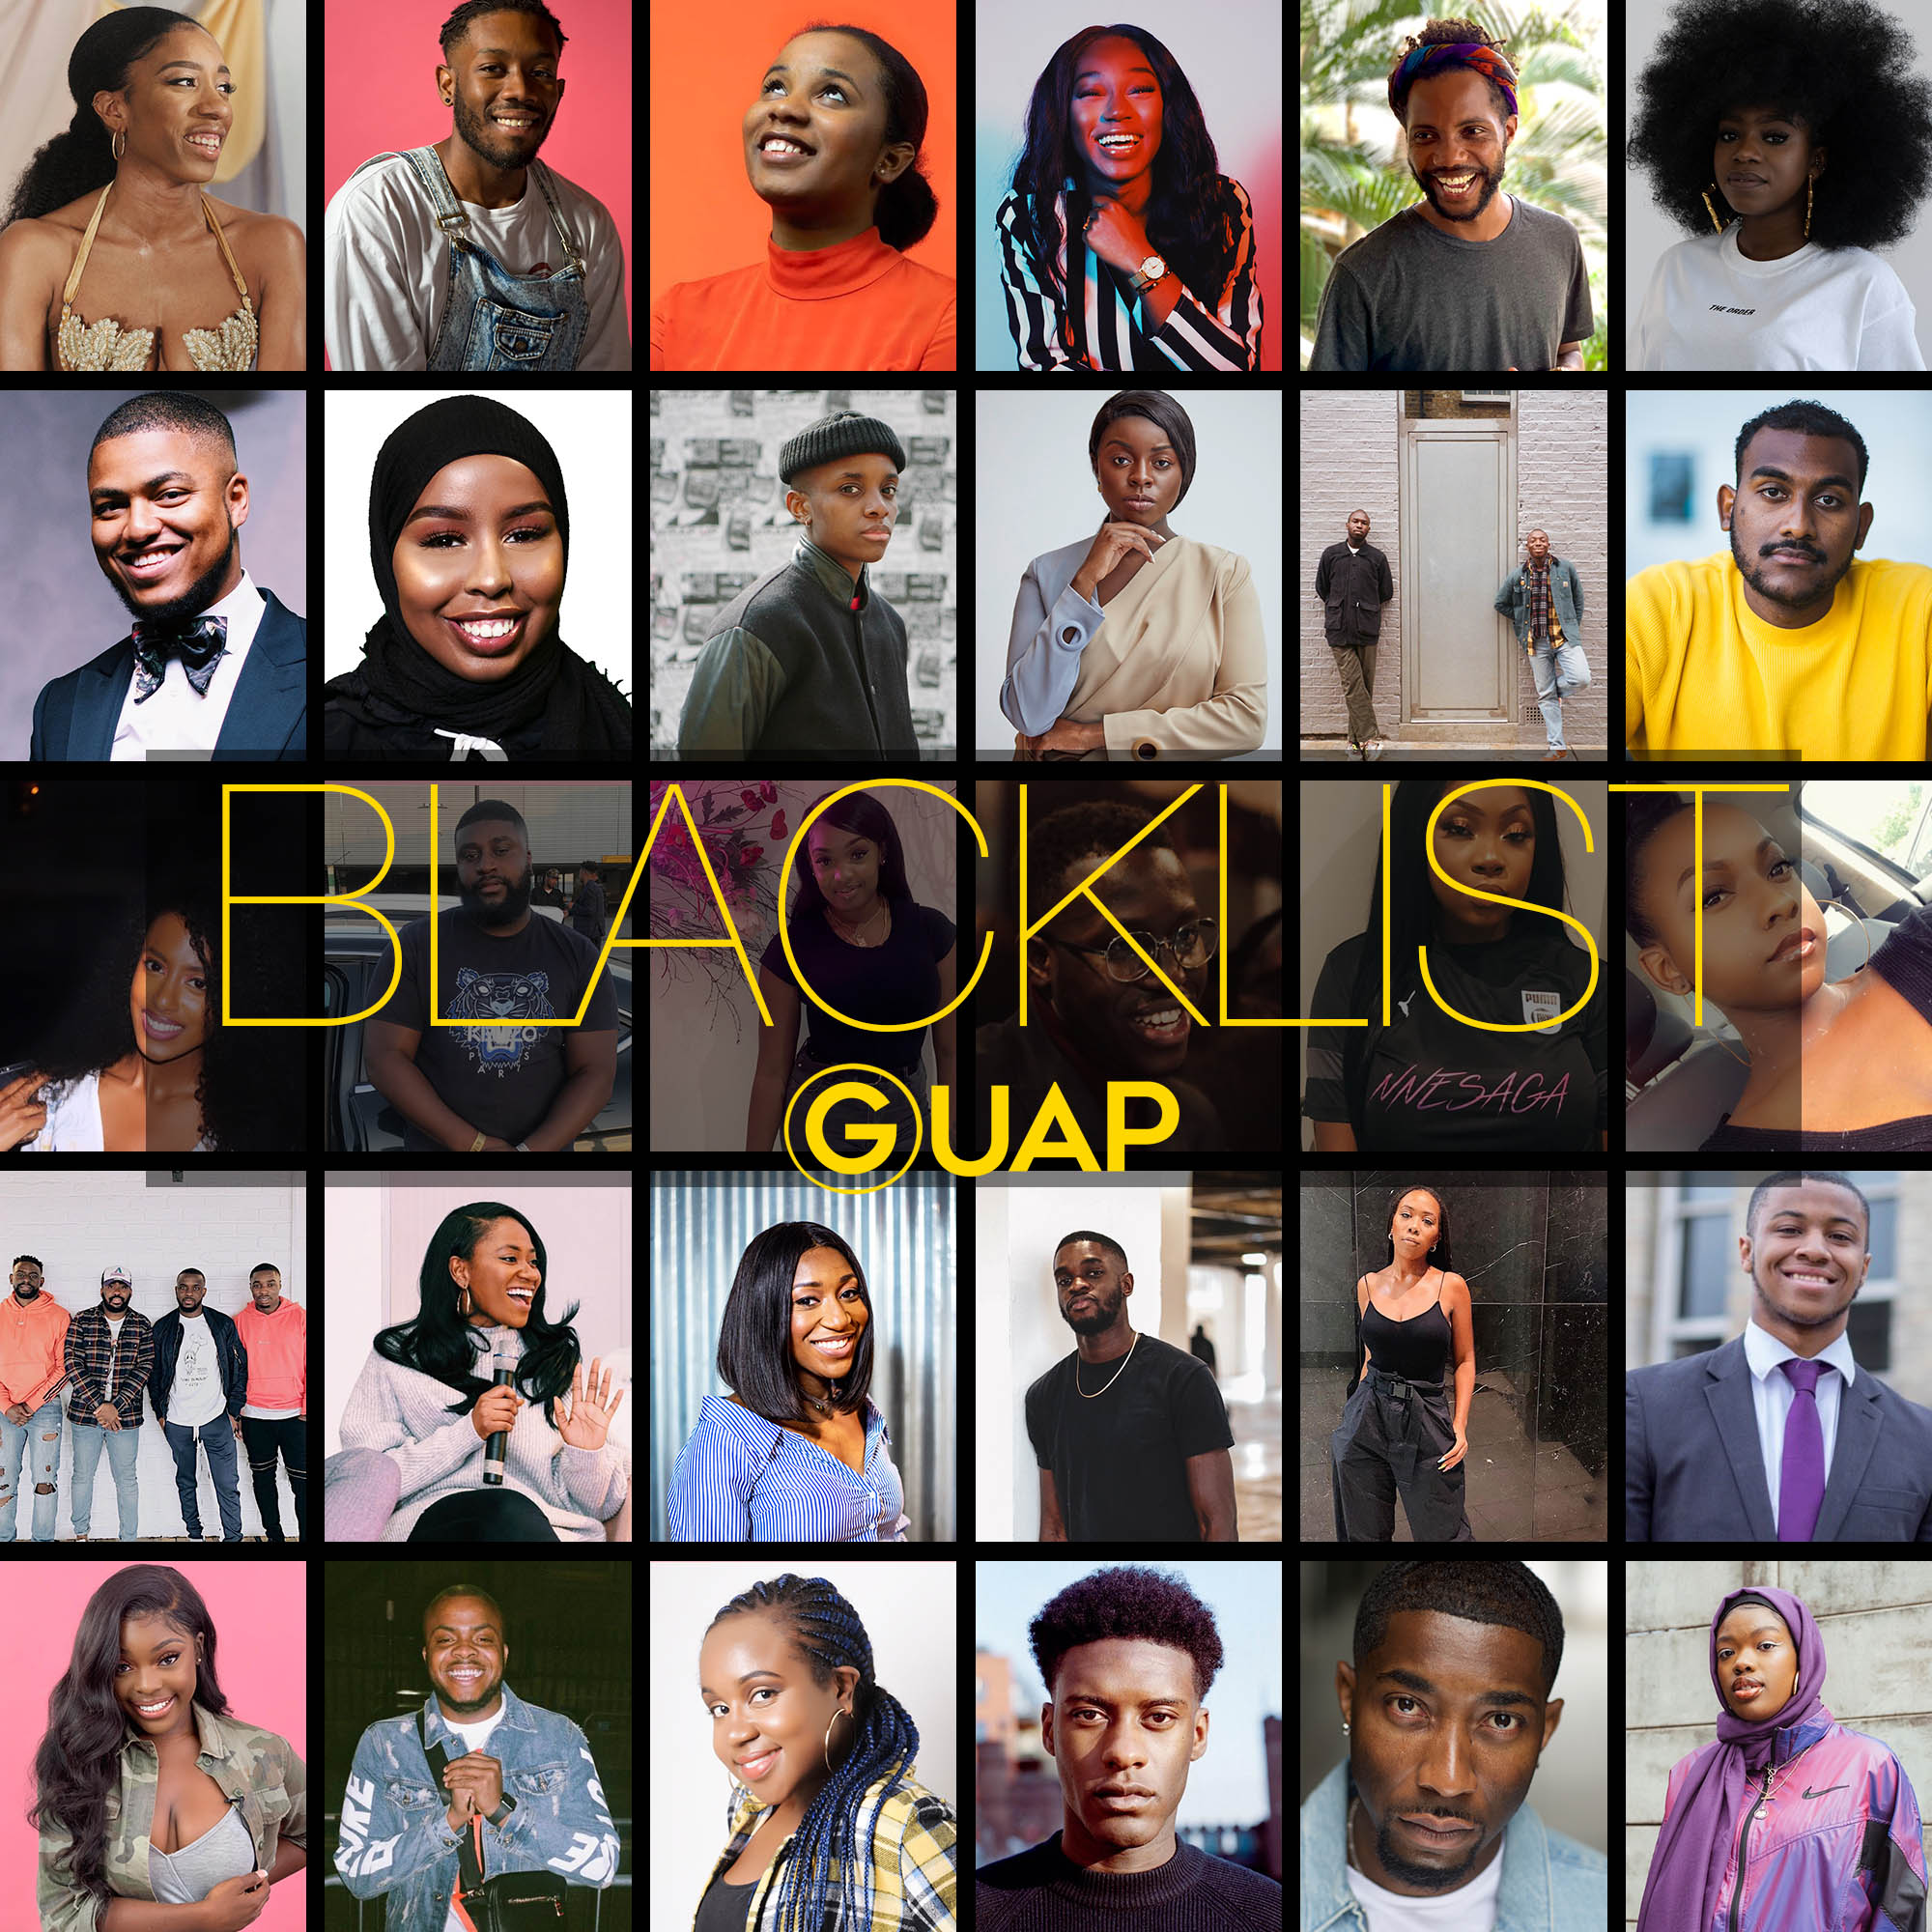 Meet the 30 under 30 Black professionals and creatives you need to know #TheBlackList2019